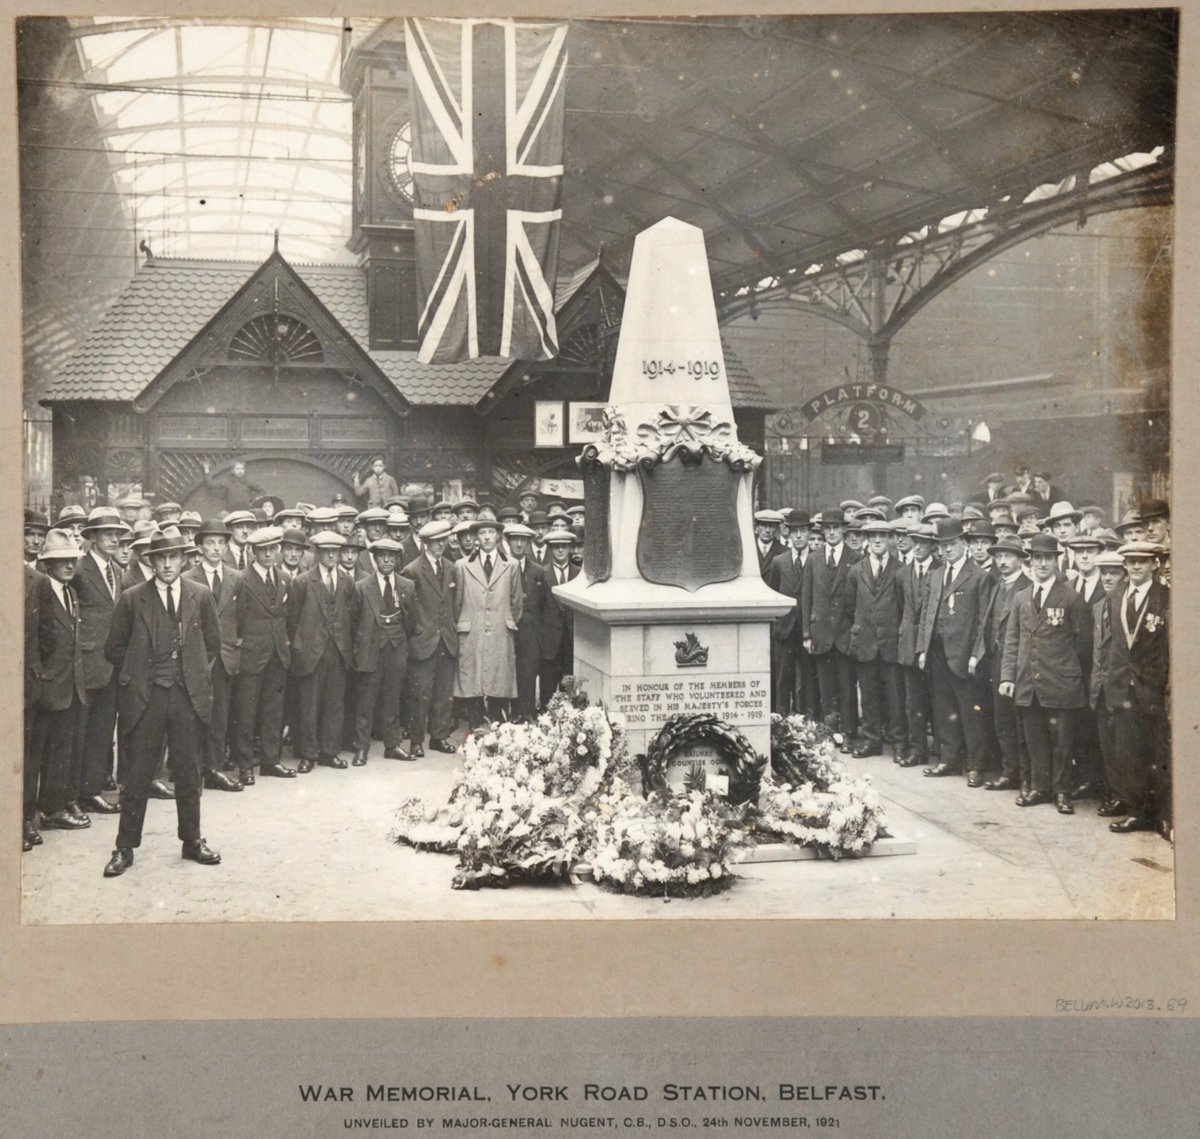 The unveiling of a war memorial by General Oliver Nugent at York Road Station, North Belfast, 24 November 1921. Eye-catching - the grave power of the veterans present, the boy hanging off the wall at the back, and the violence occurring simultaneously on the streets outside...